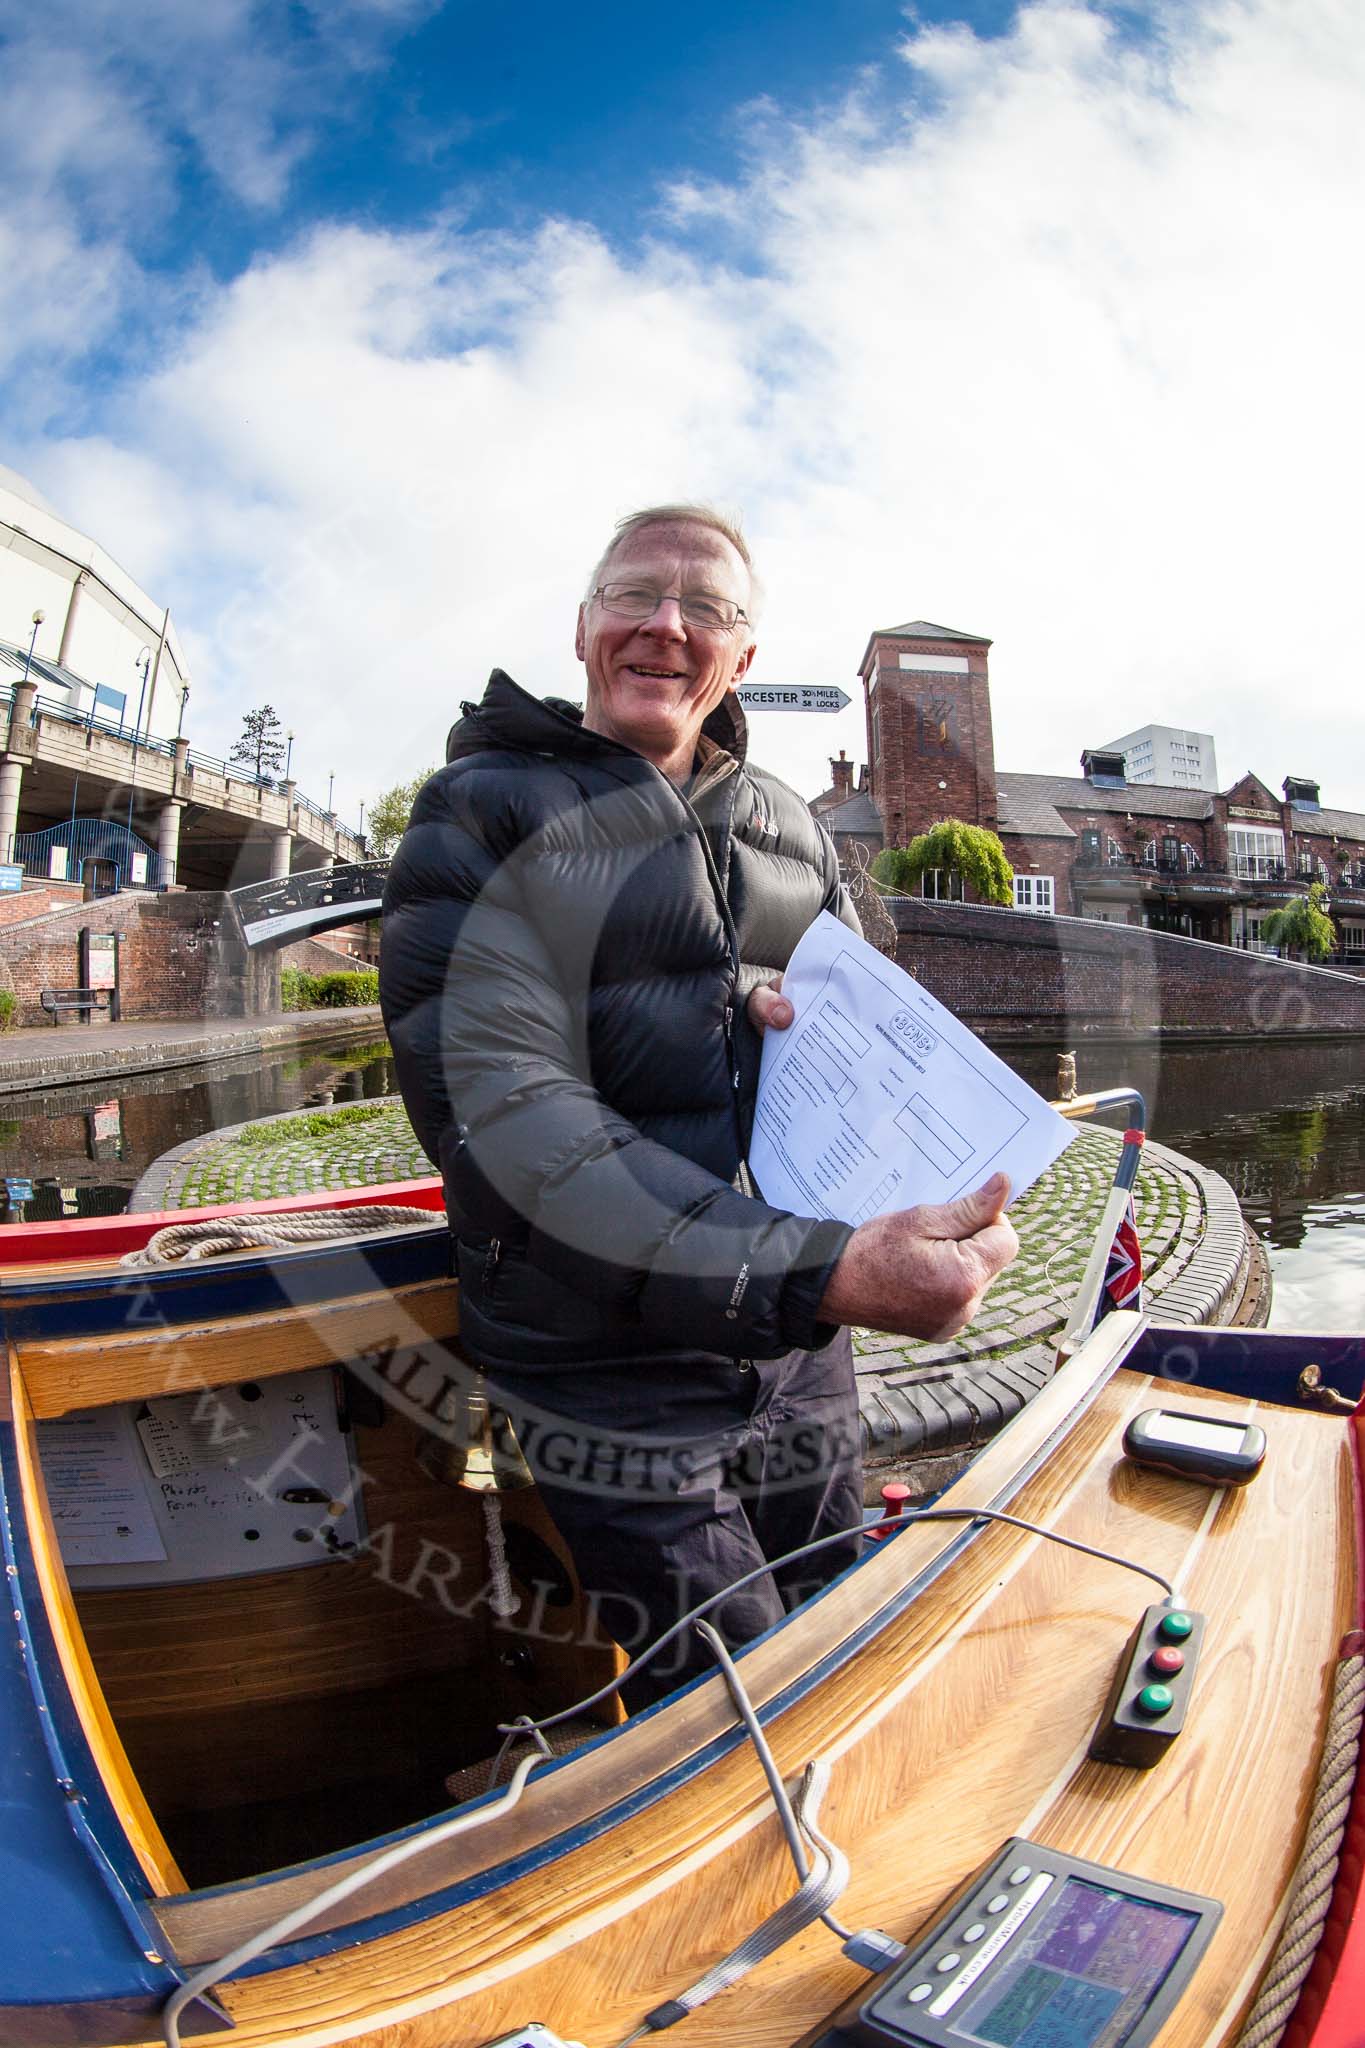 BCN Marathon Challenge 2013: Skipper Charley on board of NB "Felonious Mongoose", at Old Street Junction in the centre of Birmingham, at the start of the BCN Marathon Challenge,with the list of challenges from the sealed envelope..
Birmingham Canal Navigation,


United Kingdom,
on 25 May 2013 at 07:59, image #30